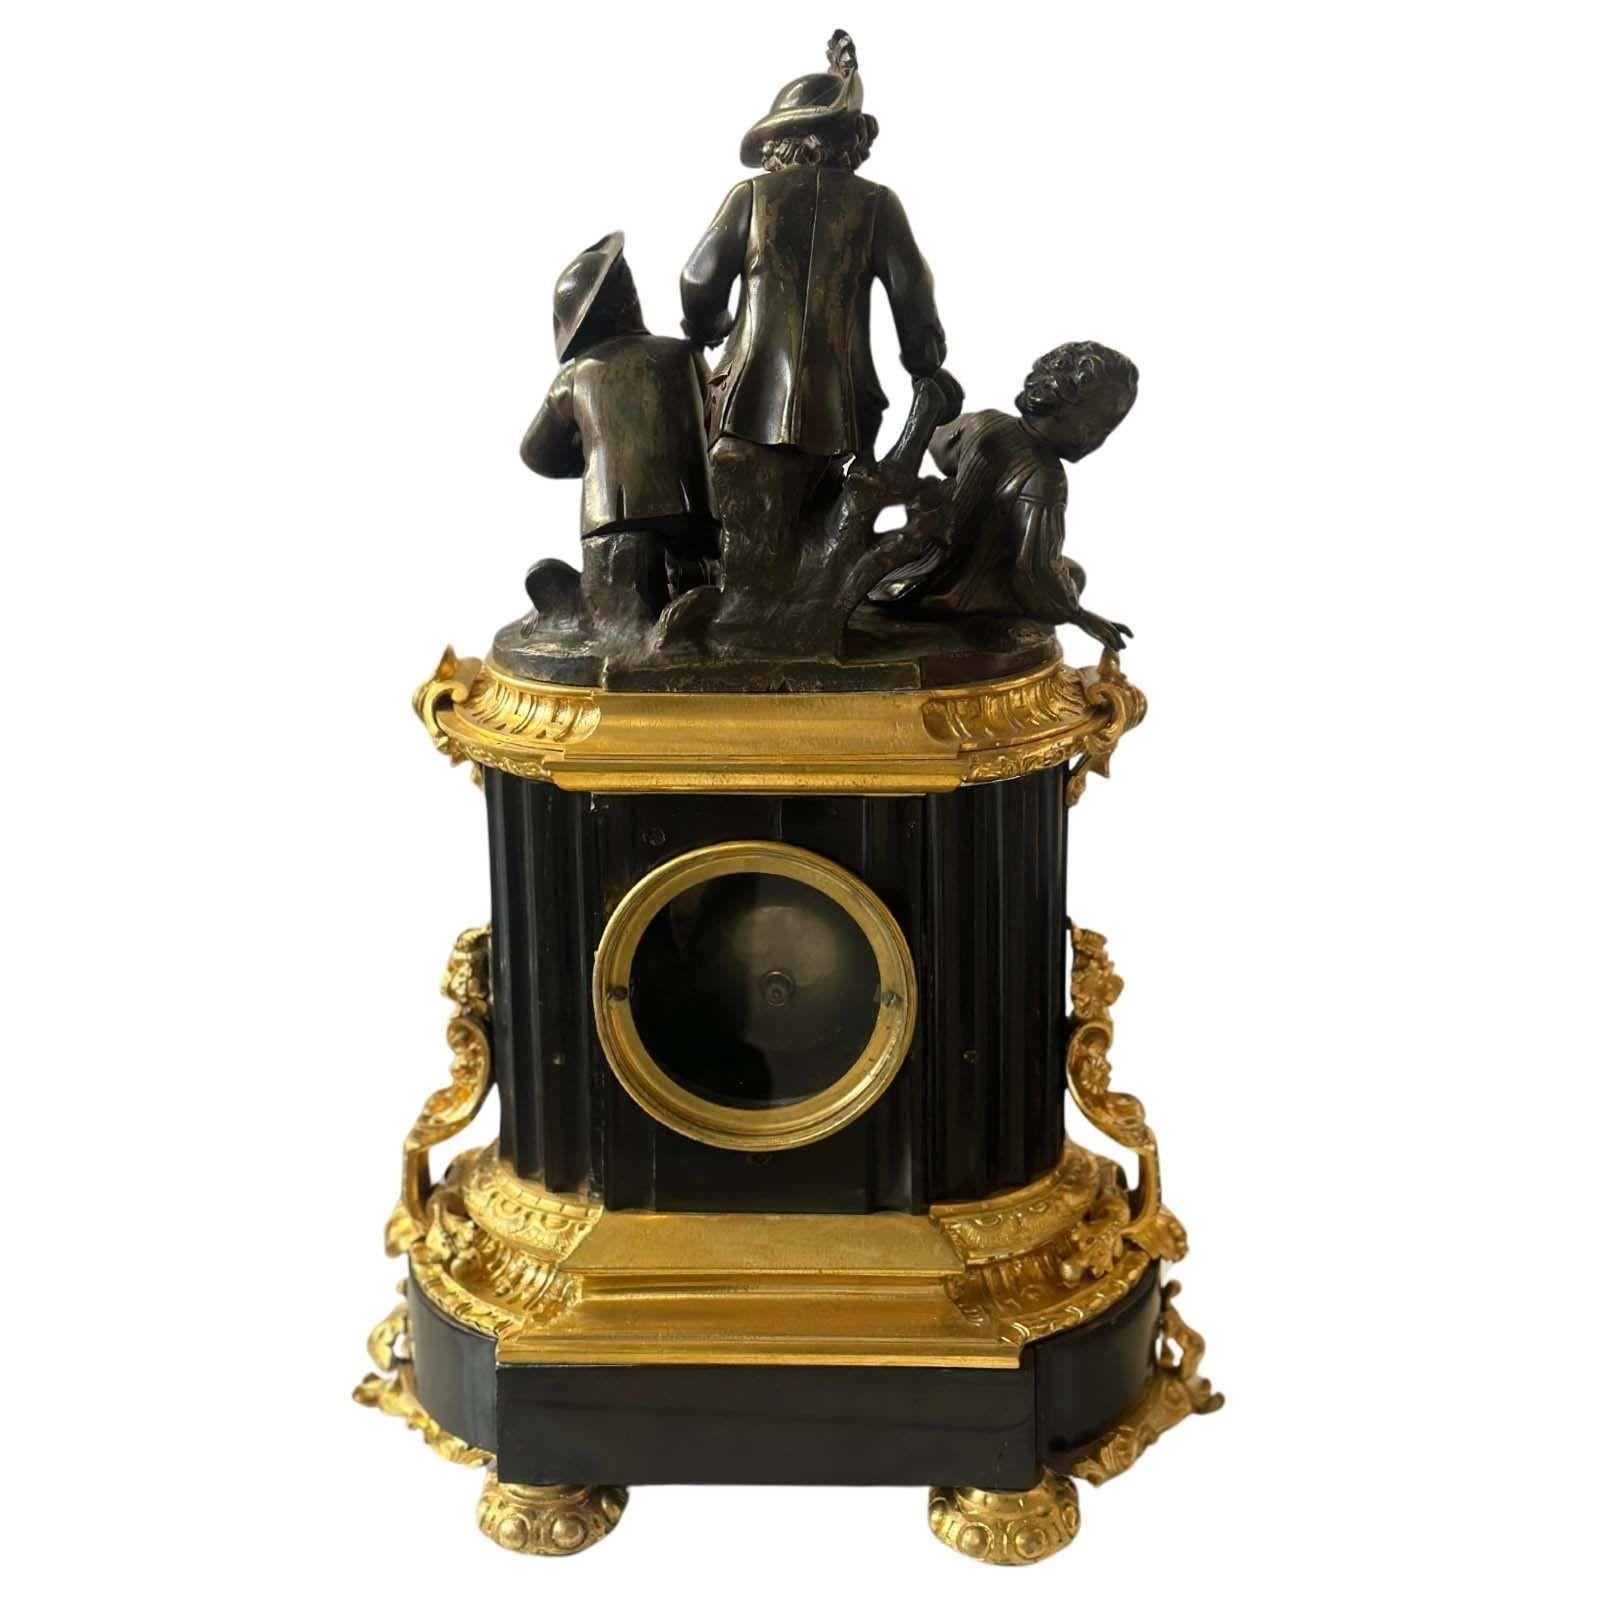 French D'ore and patinated Bronze sculptural clock by F. Dumouchel, supported by a black marble base. Made in the late 19th century; decorated with foliate motifs all around and including a depiction of three children on top.
The company achieved